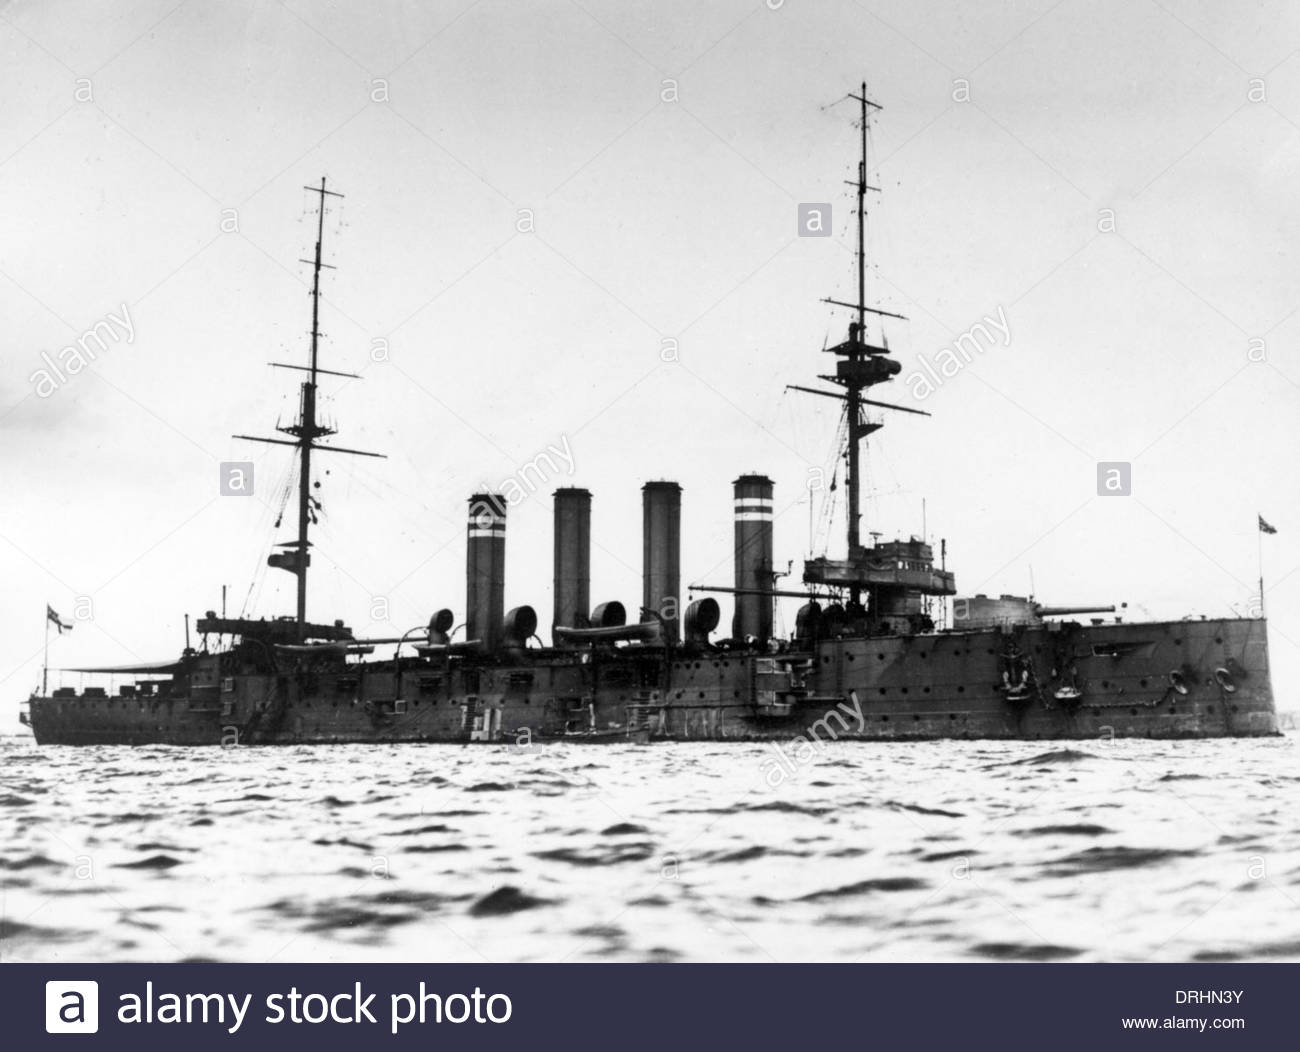 HMS Hogue was torpedo and sunk by U9 on 22-09-1914, with the loss of 375 lives.  X.png